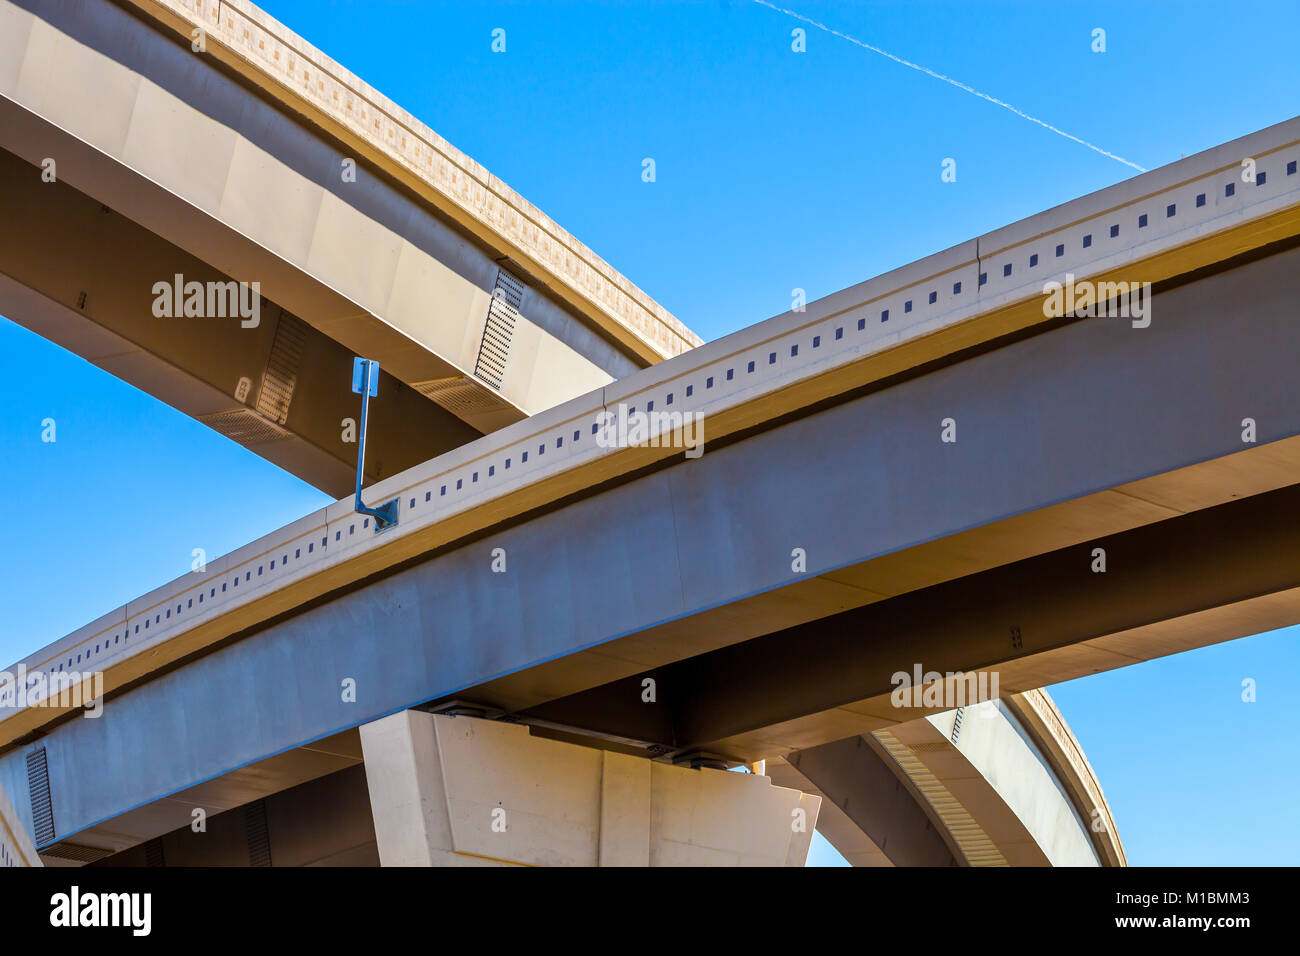 Section of elevated highway with several levels against a bright blue sky Stock Photo